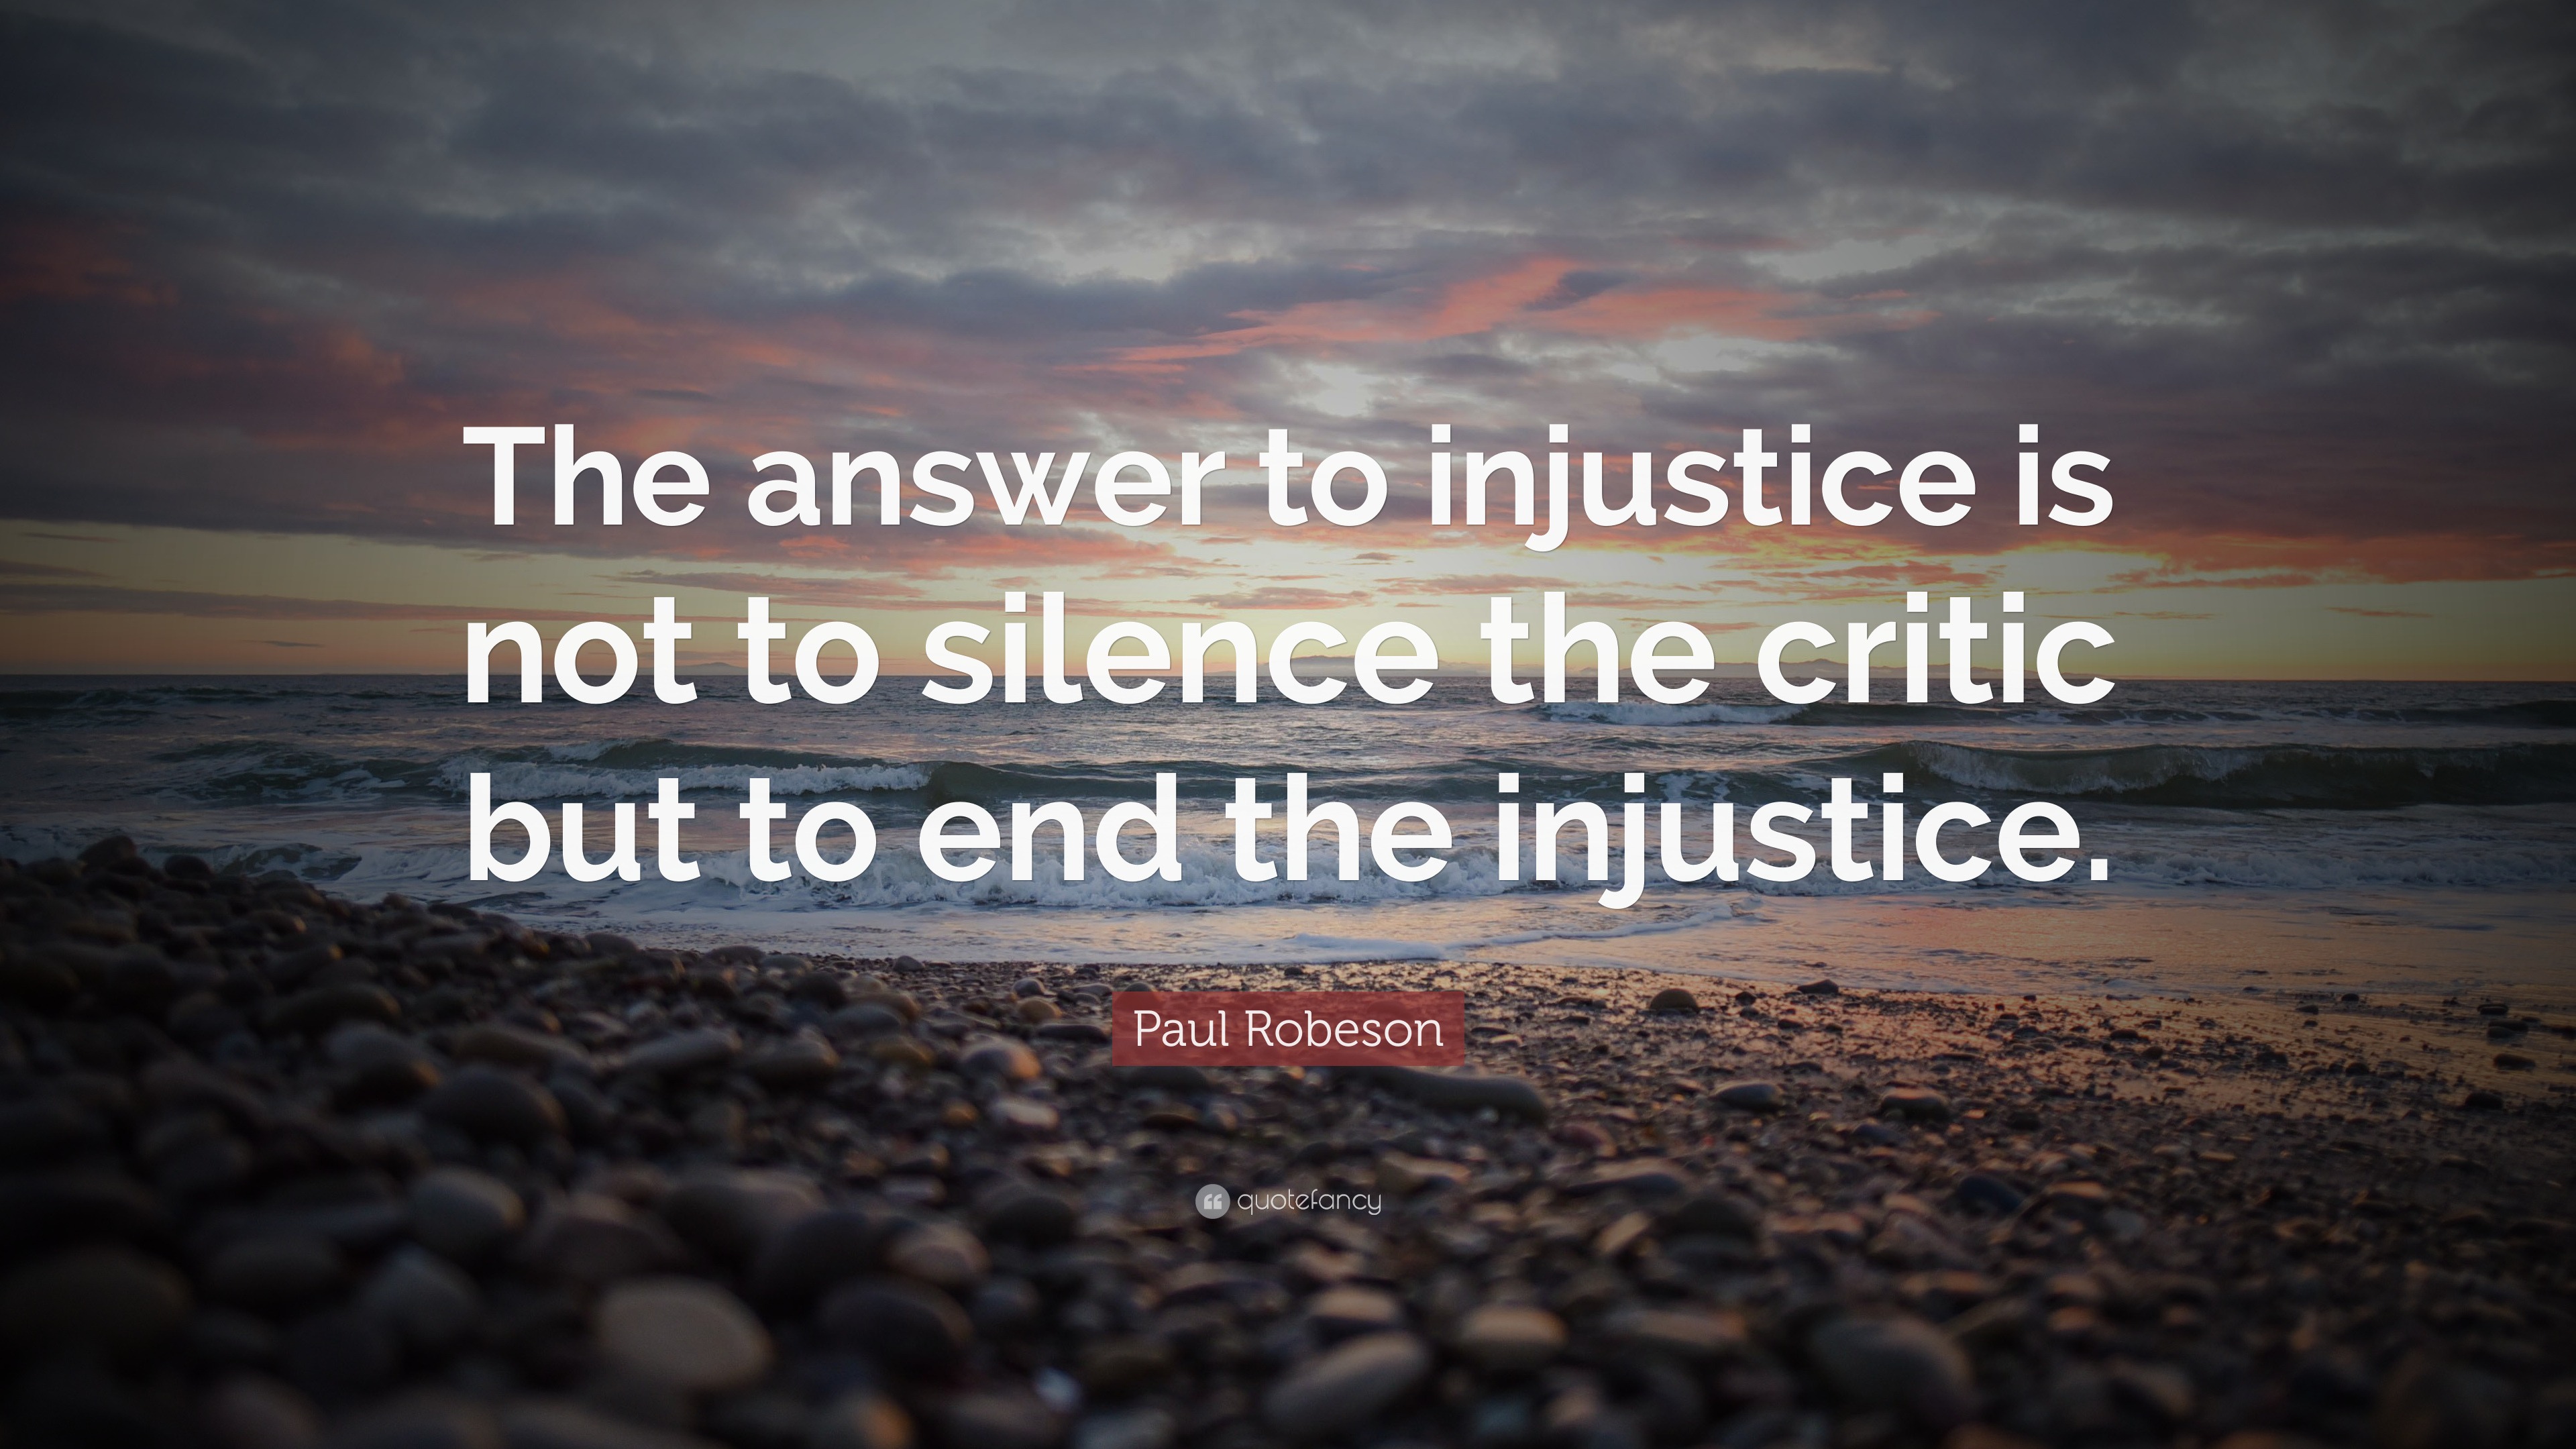 Paul Robeson Quote: “The answer to injustice is not to silence the ...